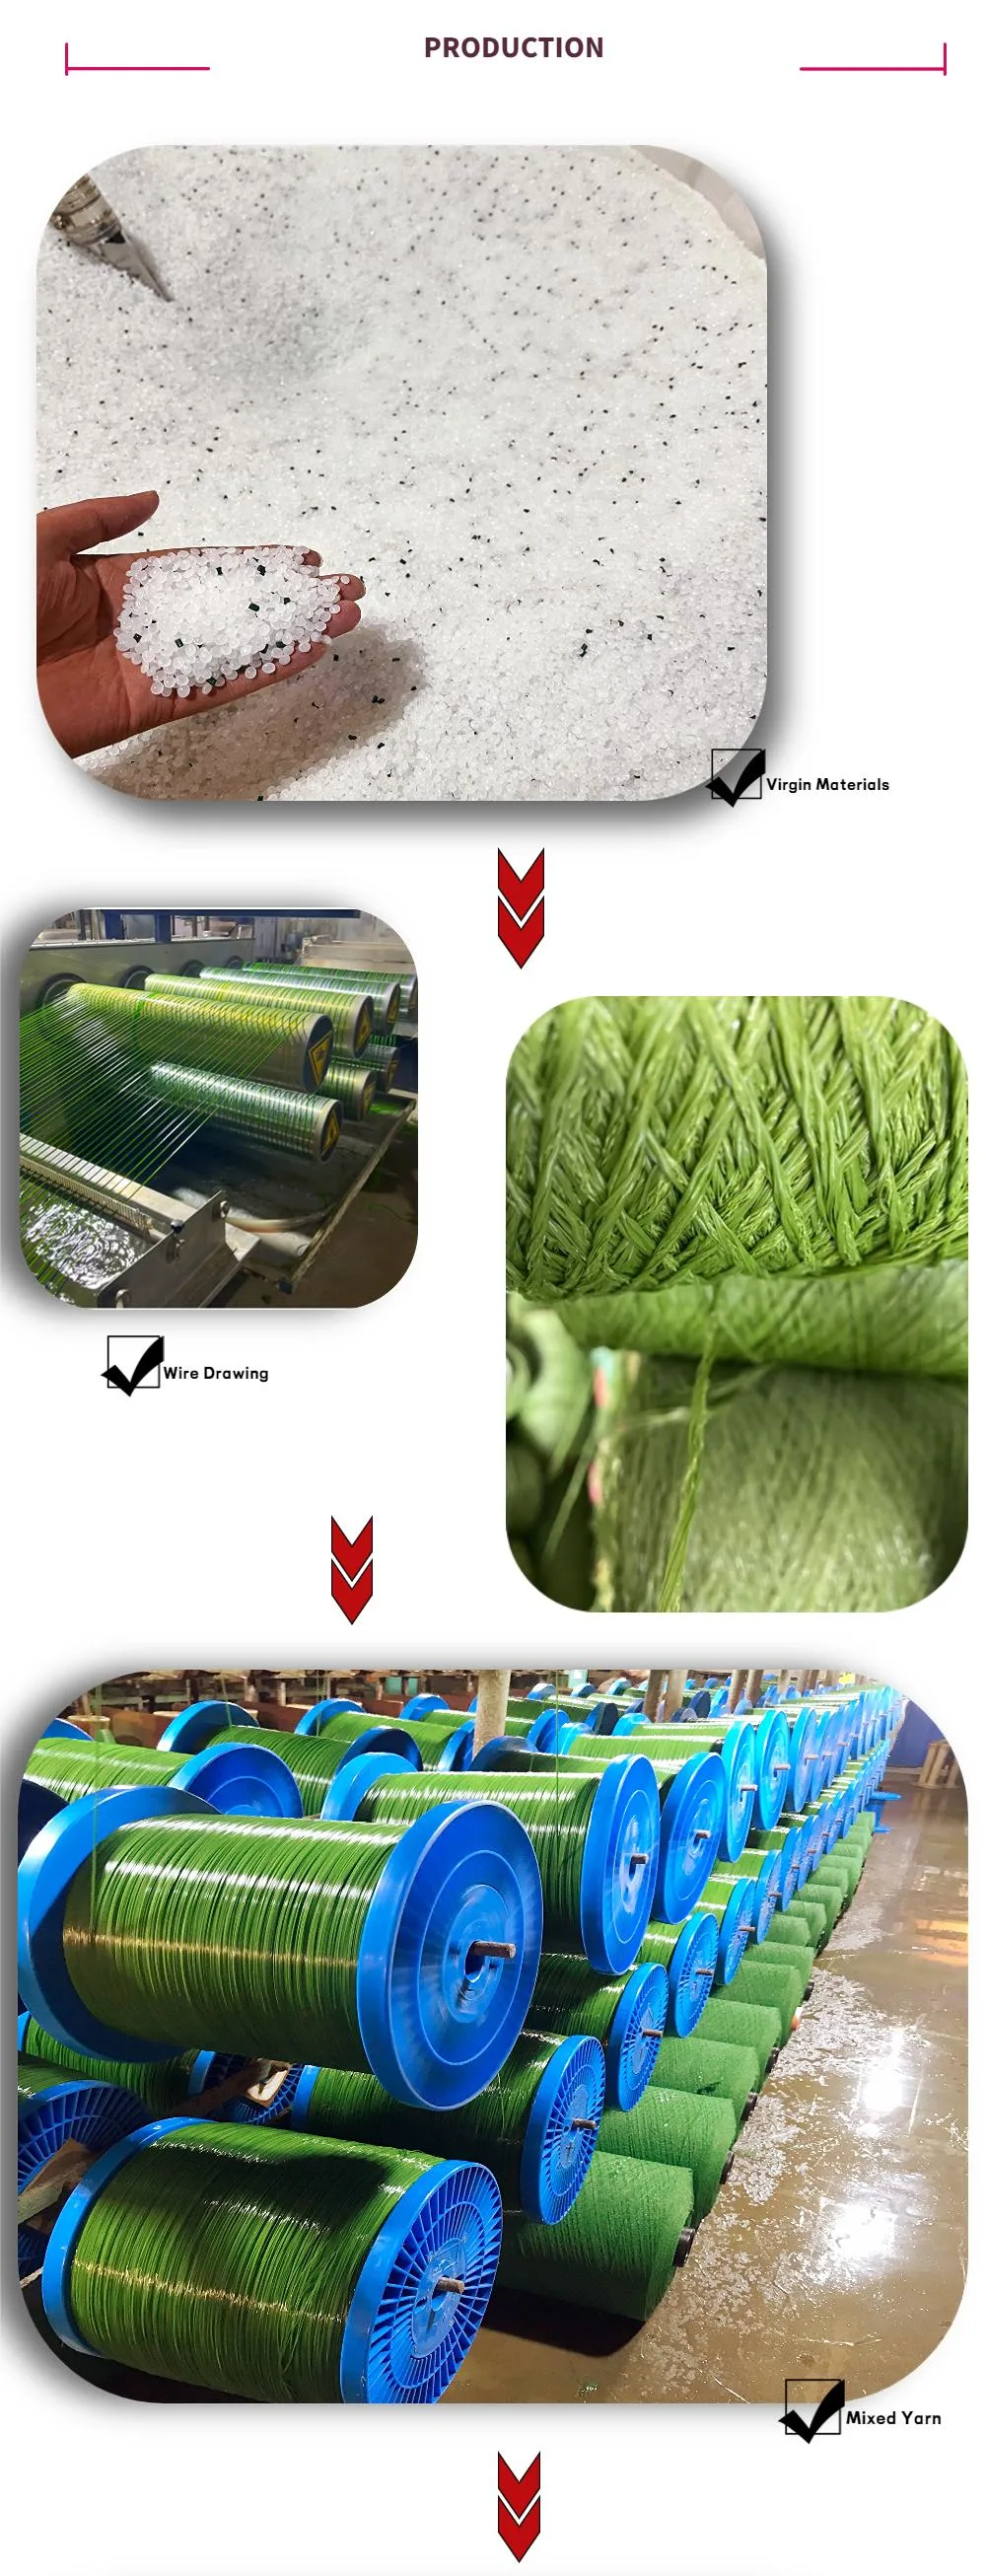 Plastic Carpet Roll Balcony Laying Leisure Artificial Grass Landscape Natural Synthetic Turf Grass for Garden